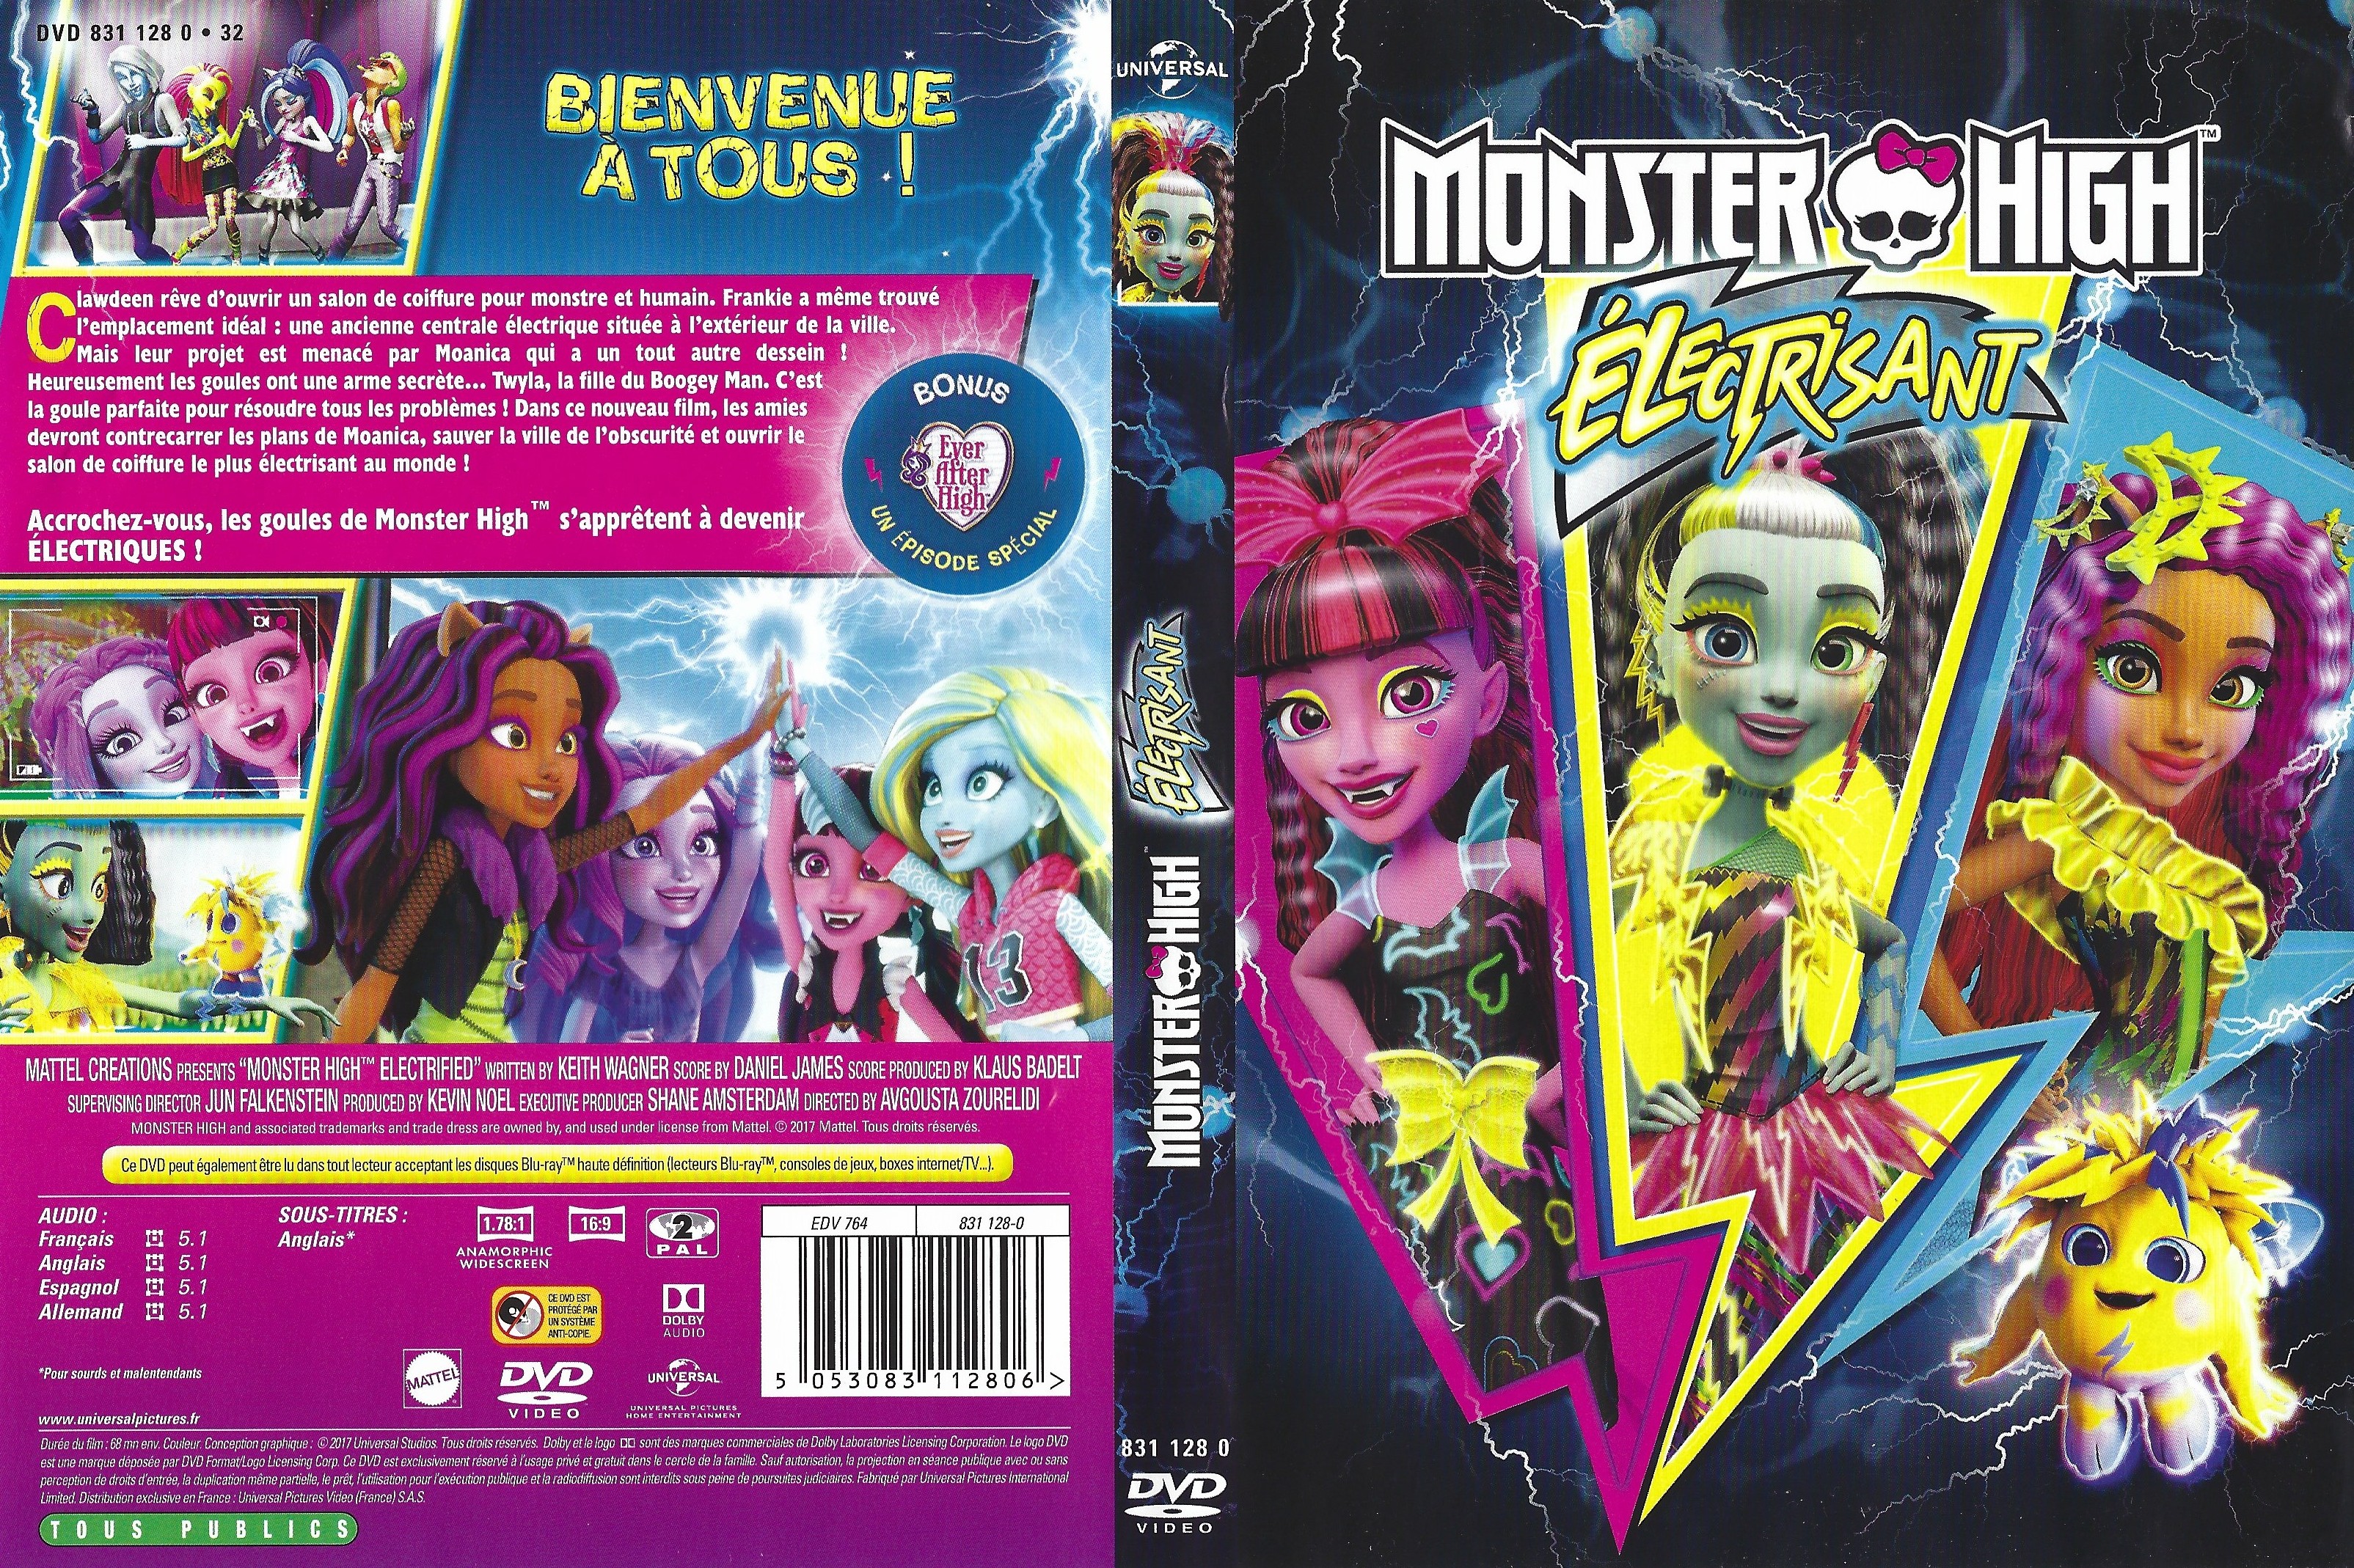 Jaquette DVD Monster High Electrisant